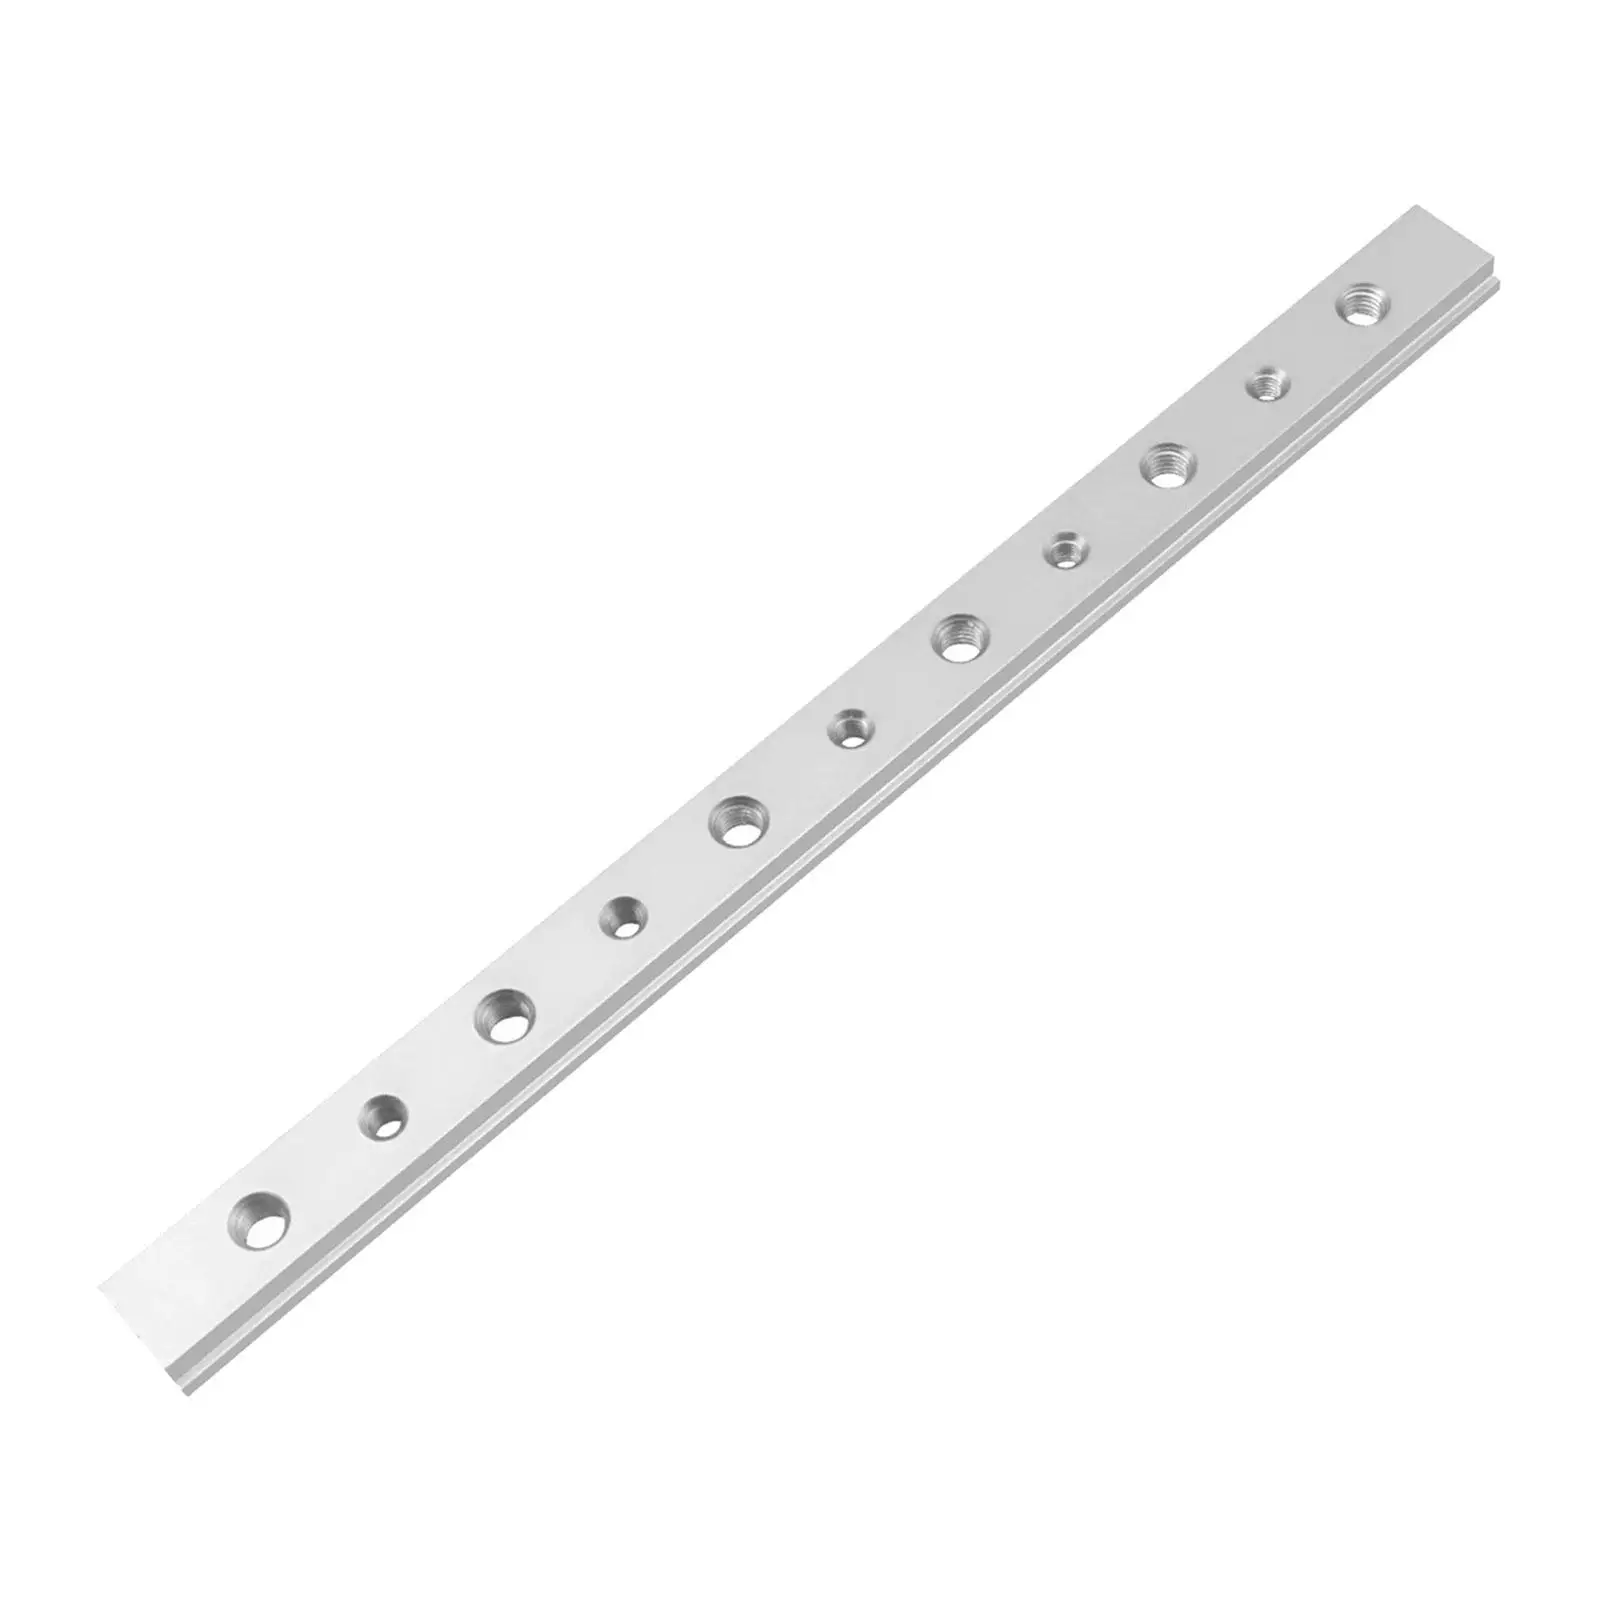 Aluminium Alloy Miter Bar for Tension Devices, Sledge Jig and Fixture Bar